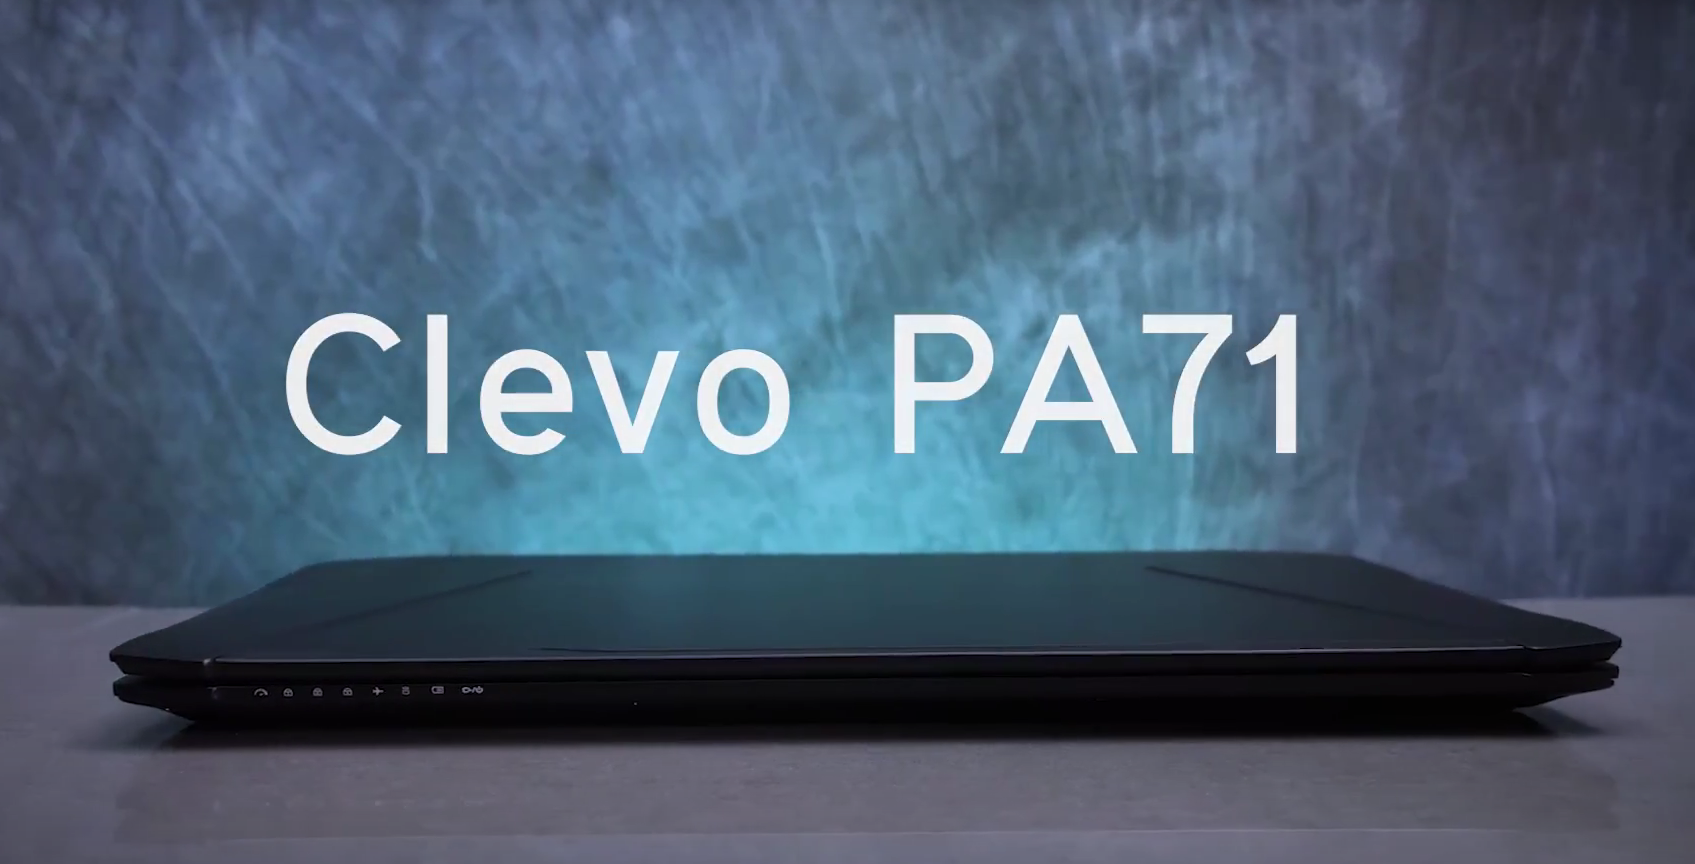 The Ultimate Laptop for Gaming and Work: The Clevo PA71